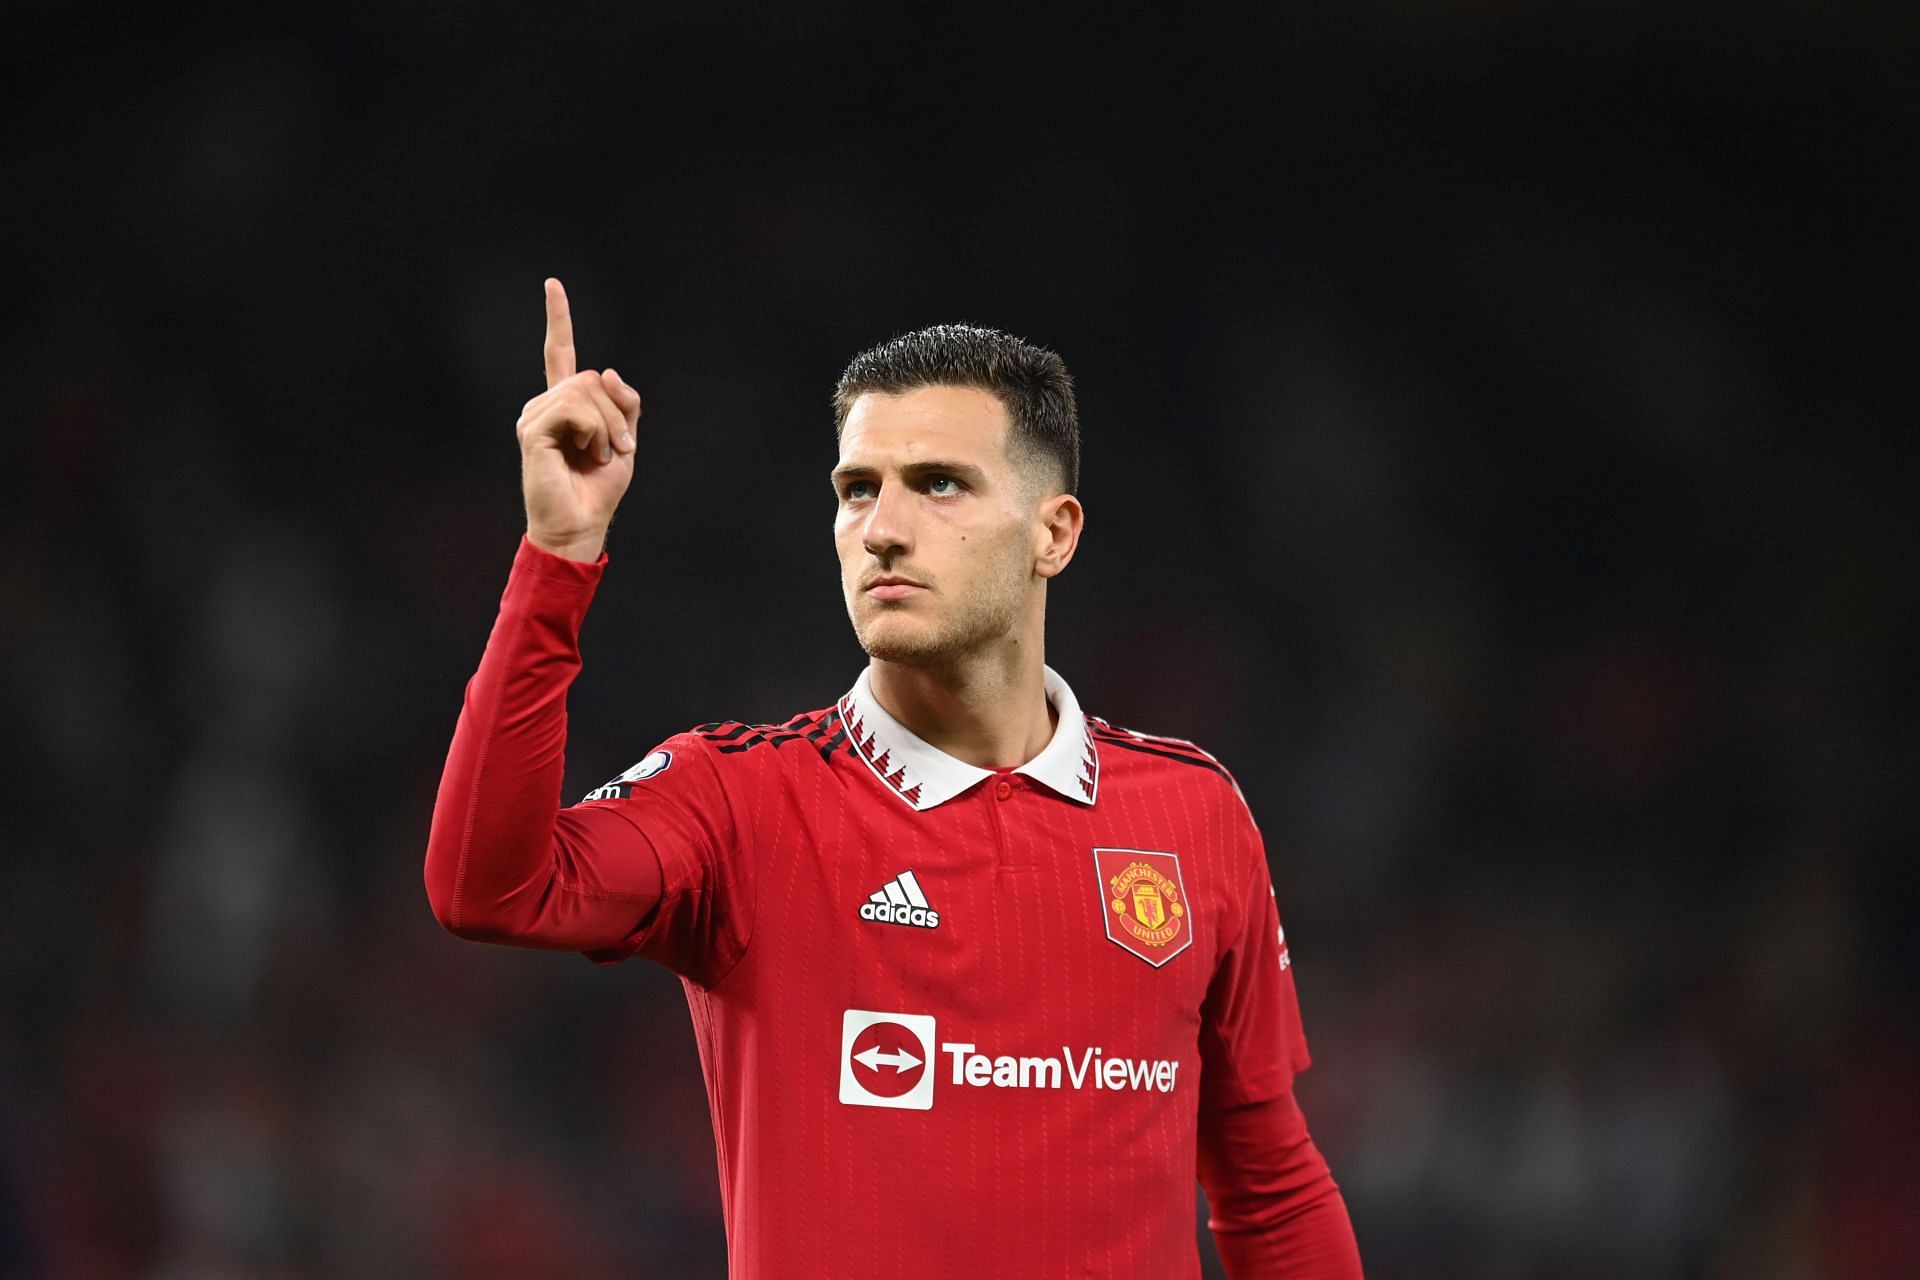 Diogo Dalot has been on inspired form this season.